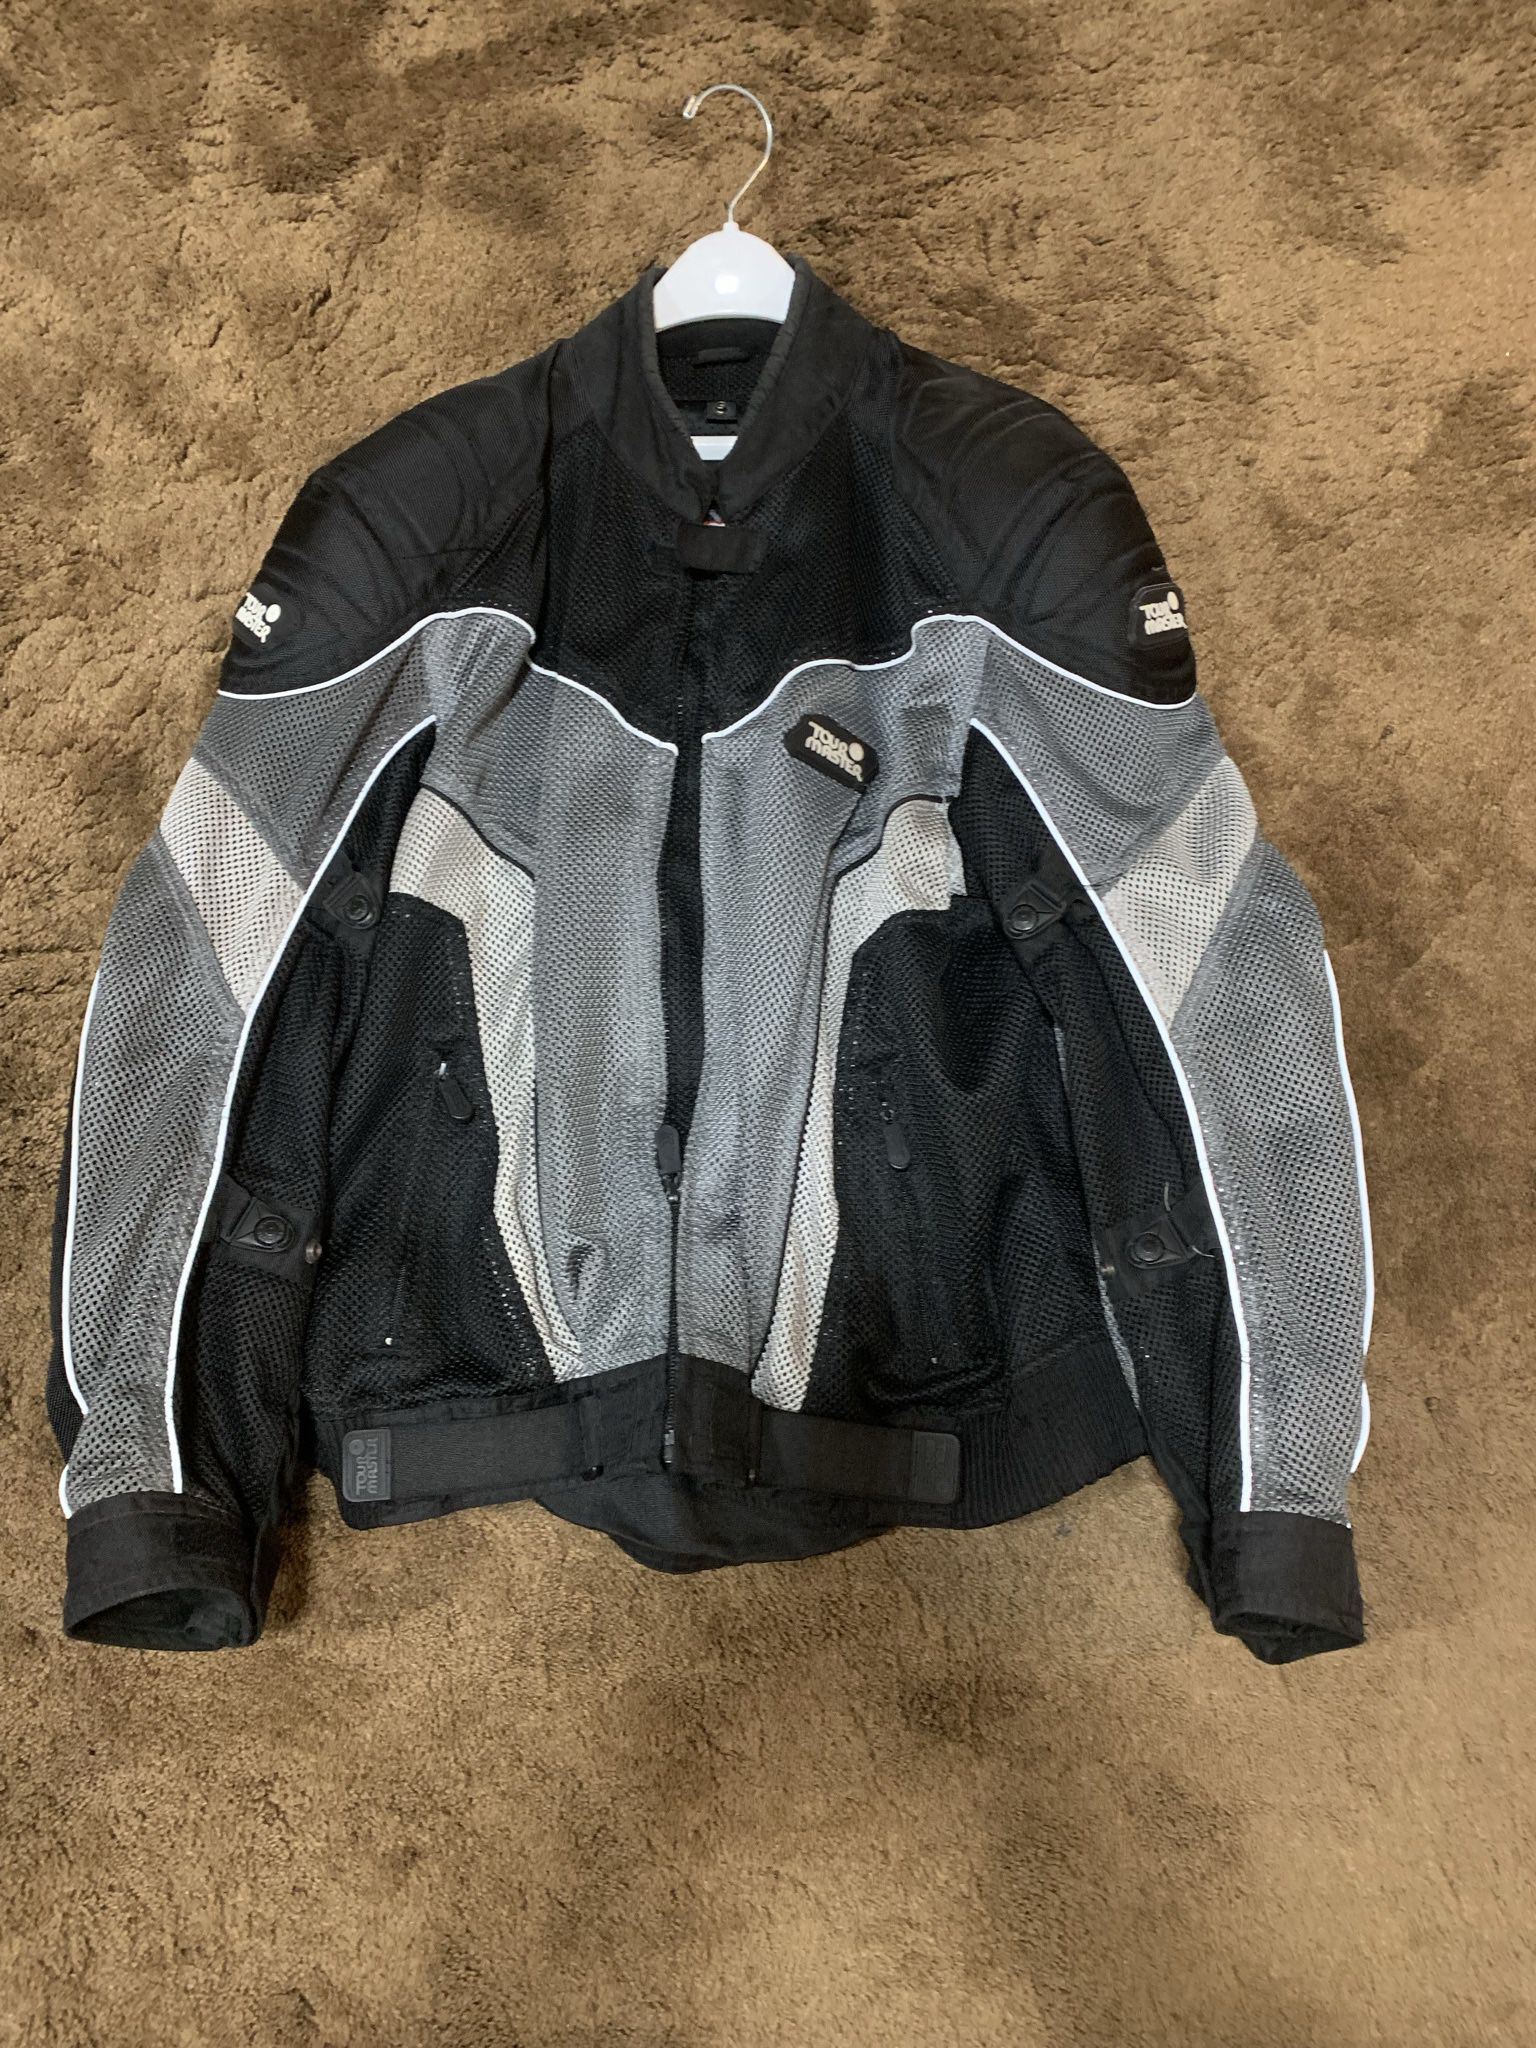 Tourmaster Motorcycle All Weather Riding Jacket